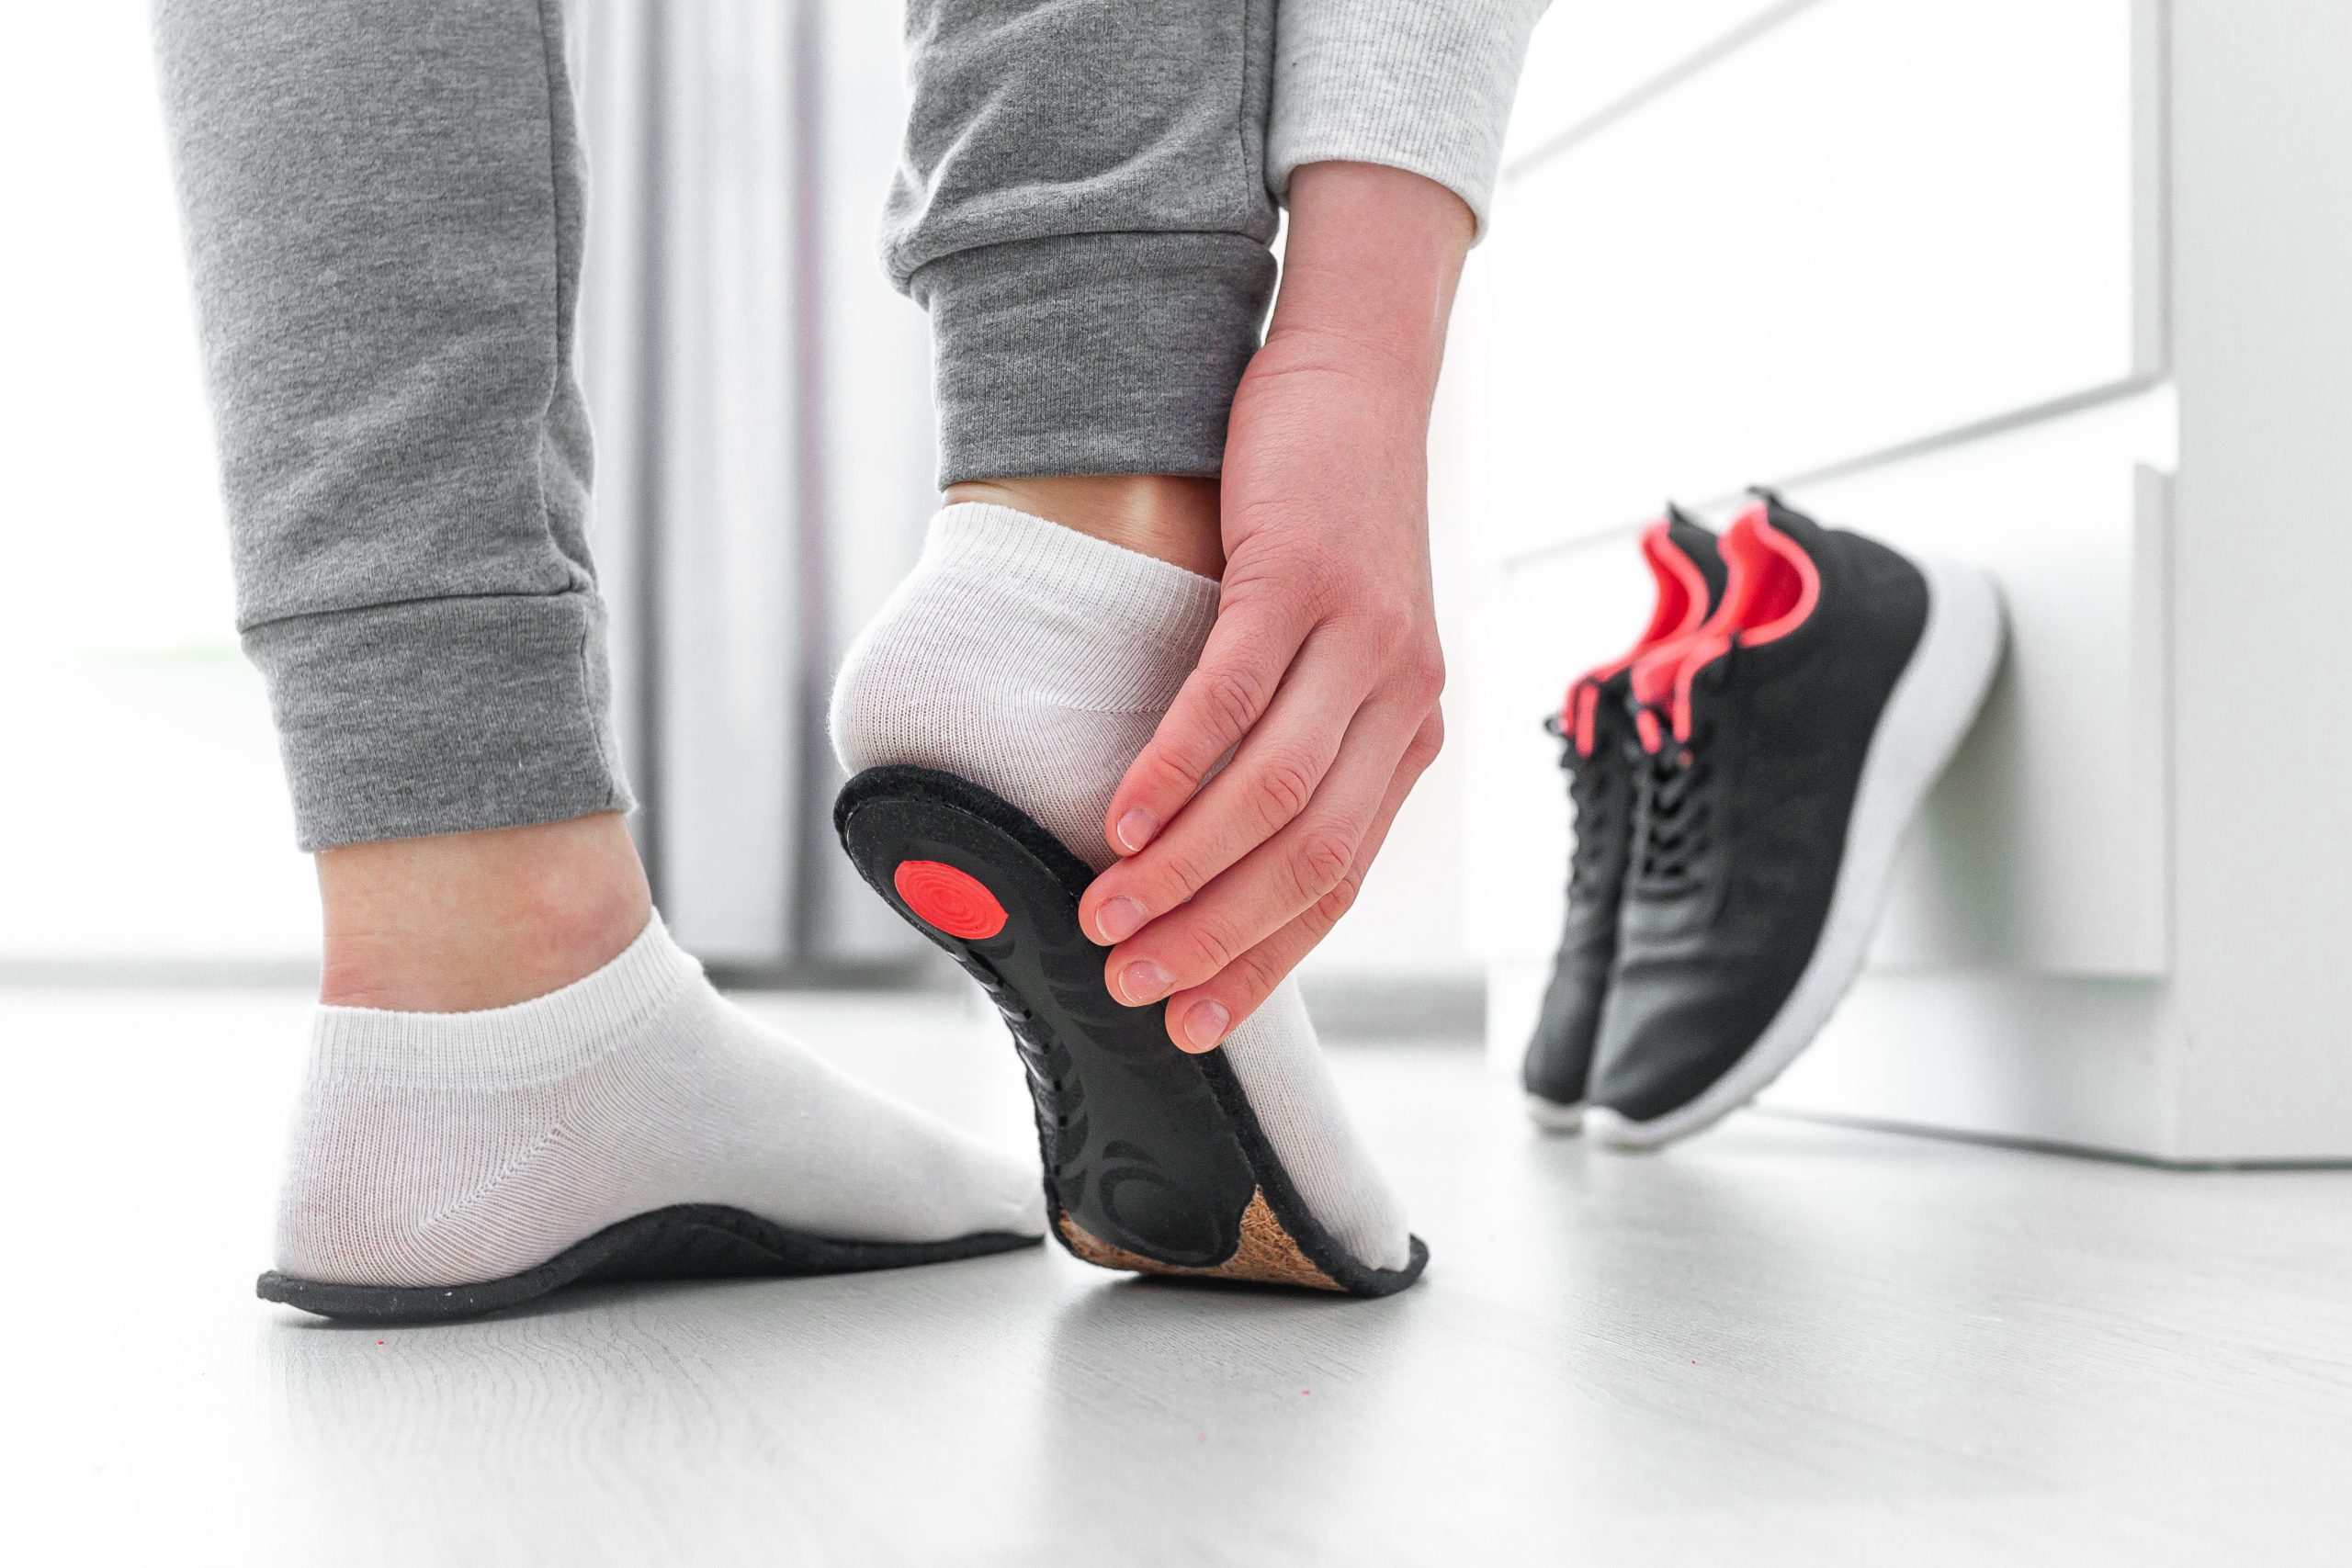 What can damage your foot orthoses?